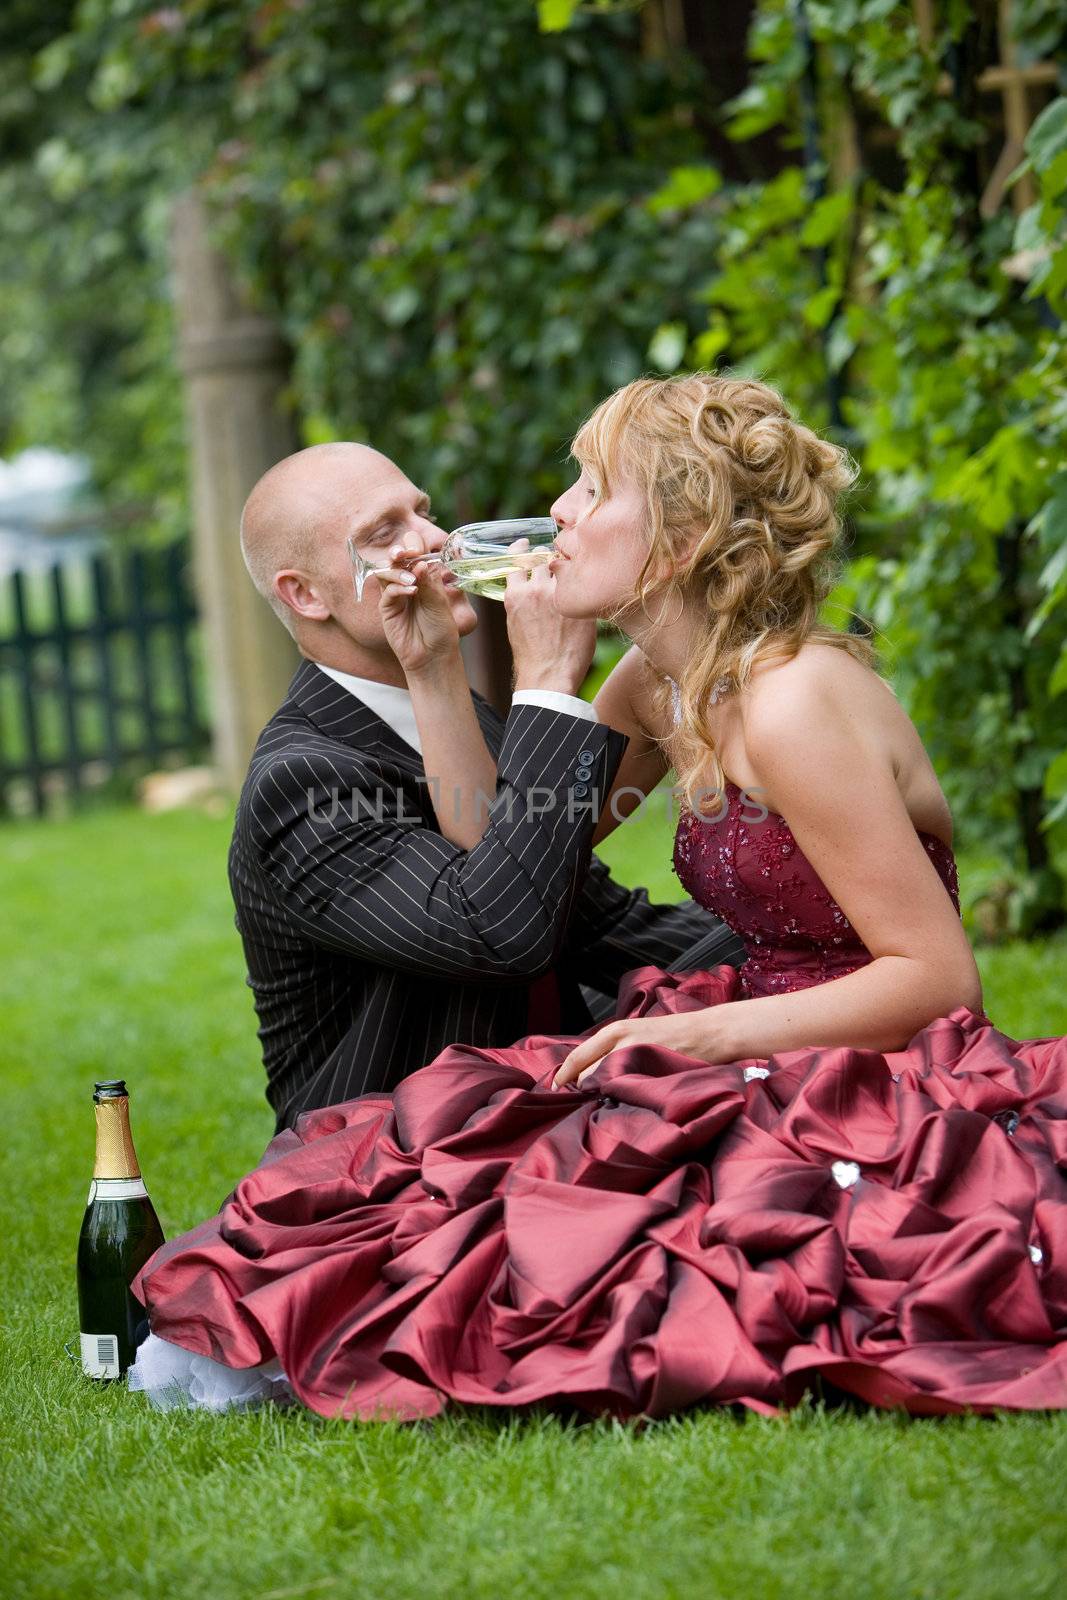 Cute young couple having a drink together outdoors